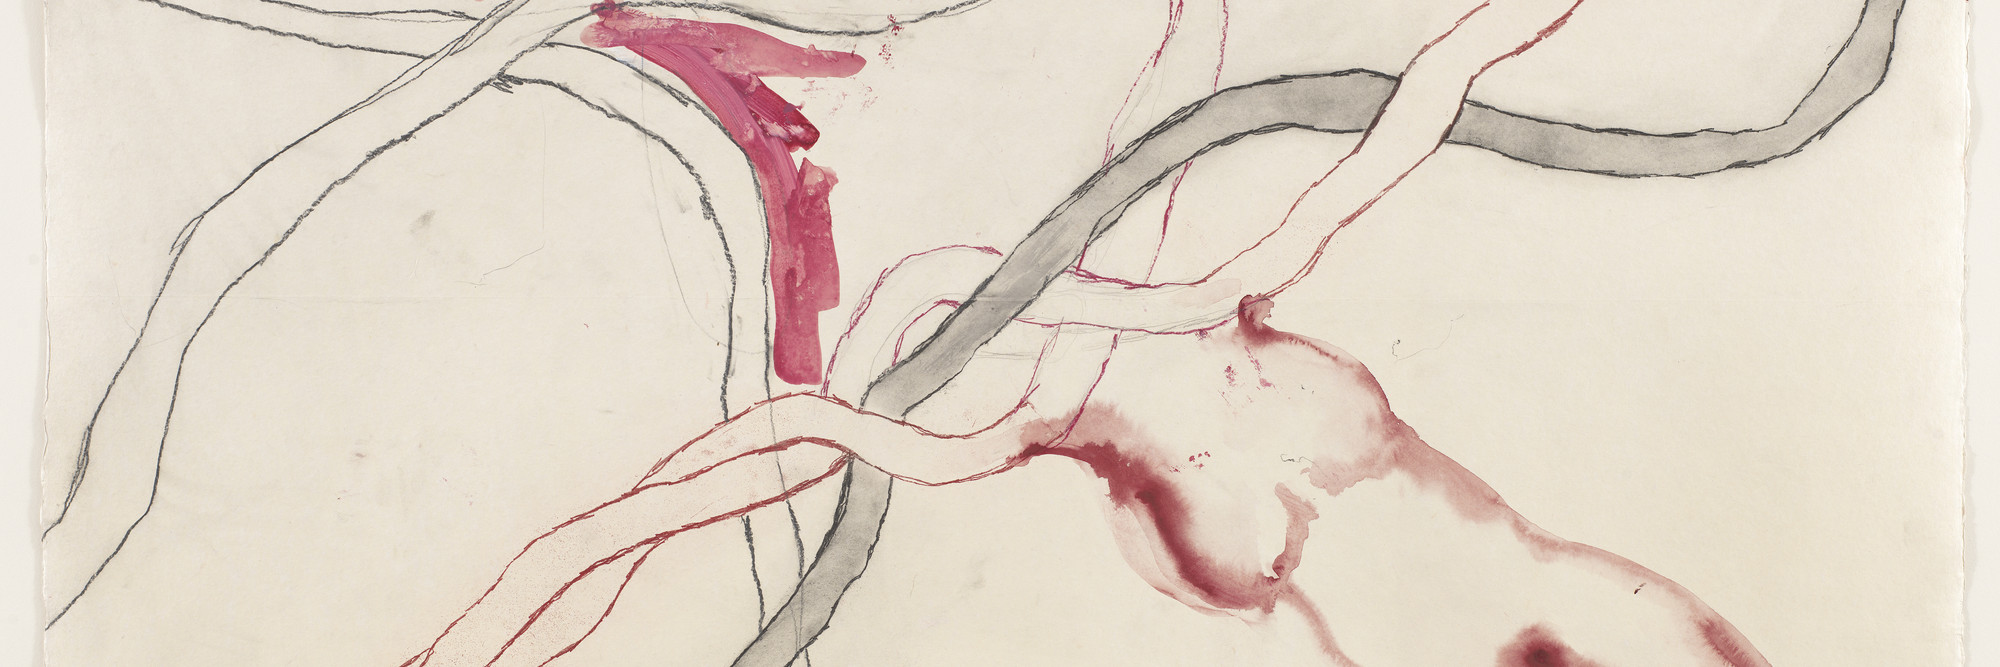 Louise Bourgeois. No. 5 of 14 from the installation set À l’Infini. 2008. Soft ground etching, with selective wiping, watercolor, gouache, pencil, colored pencil, and watercolor wash additions, 40 x 60&#34; (101.6 x 152.4 cm). The Museum of Modern Art, New York. Purchased with funds provided by Agnes Gund, Marie-Josée and Henry R. Kravis, Marlene Hess and James D. Zirin, Maja Oeri and Hans Bodenmann, and Katherine Farley and Jerry Speyer, and Richard S. Zeisler Bequest (by exchange). © 2017 The Easton Foundation/Licensed by VAGA, NY